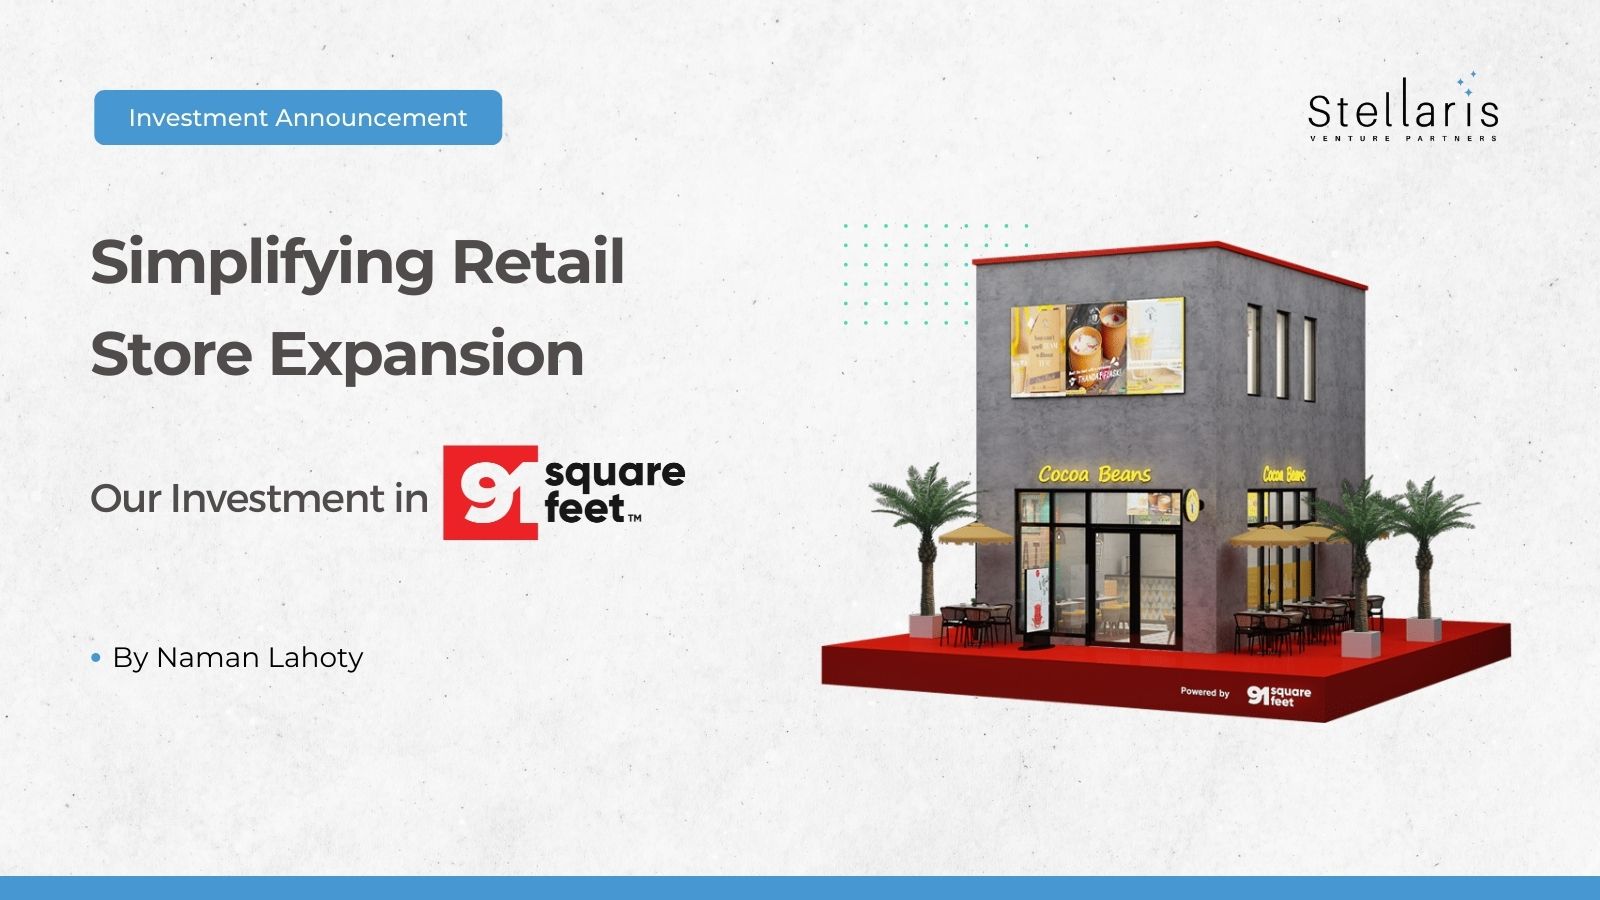 Simplifying Retail Store Expansion – Our Investment in 91SquareFeet